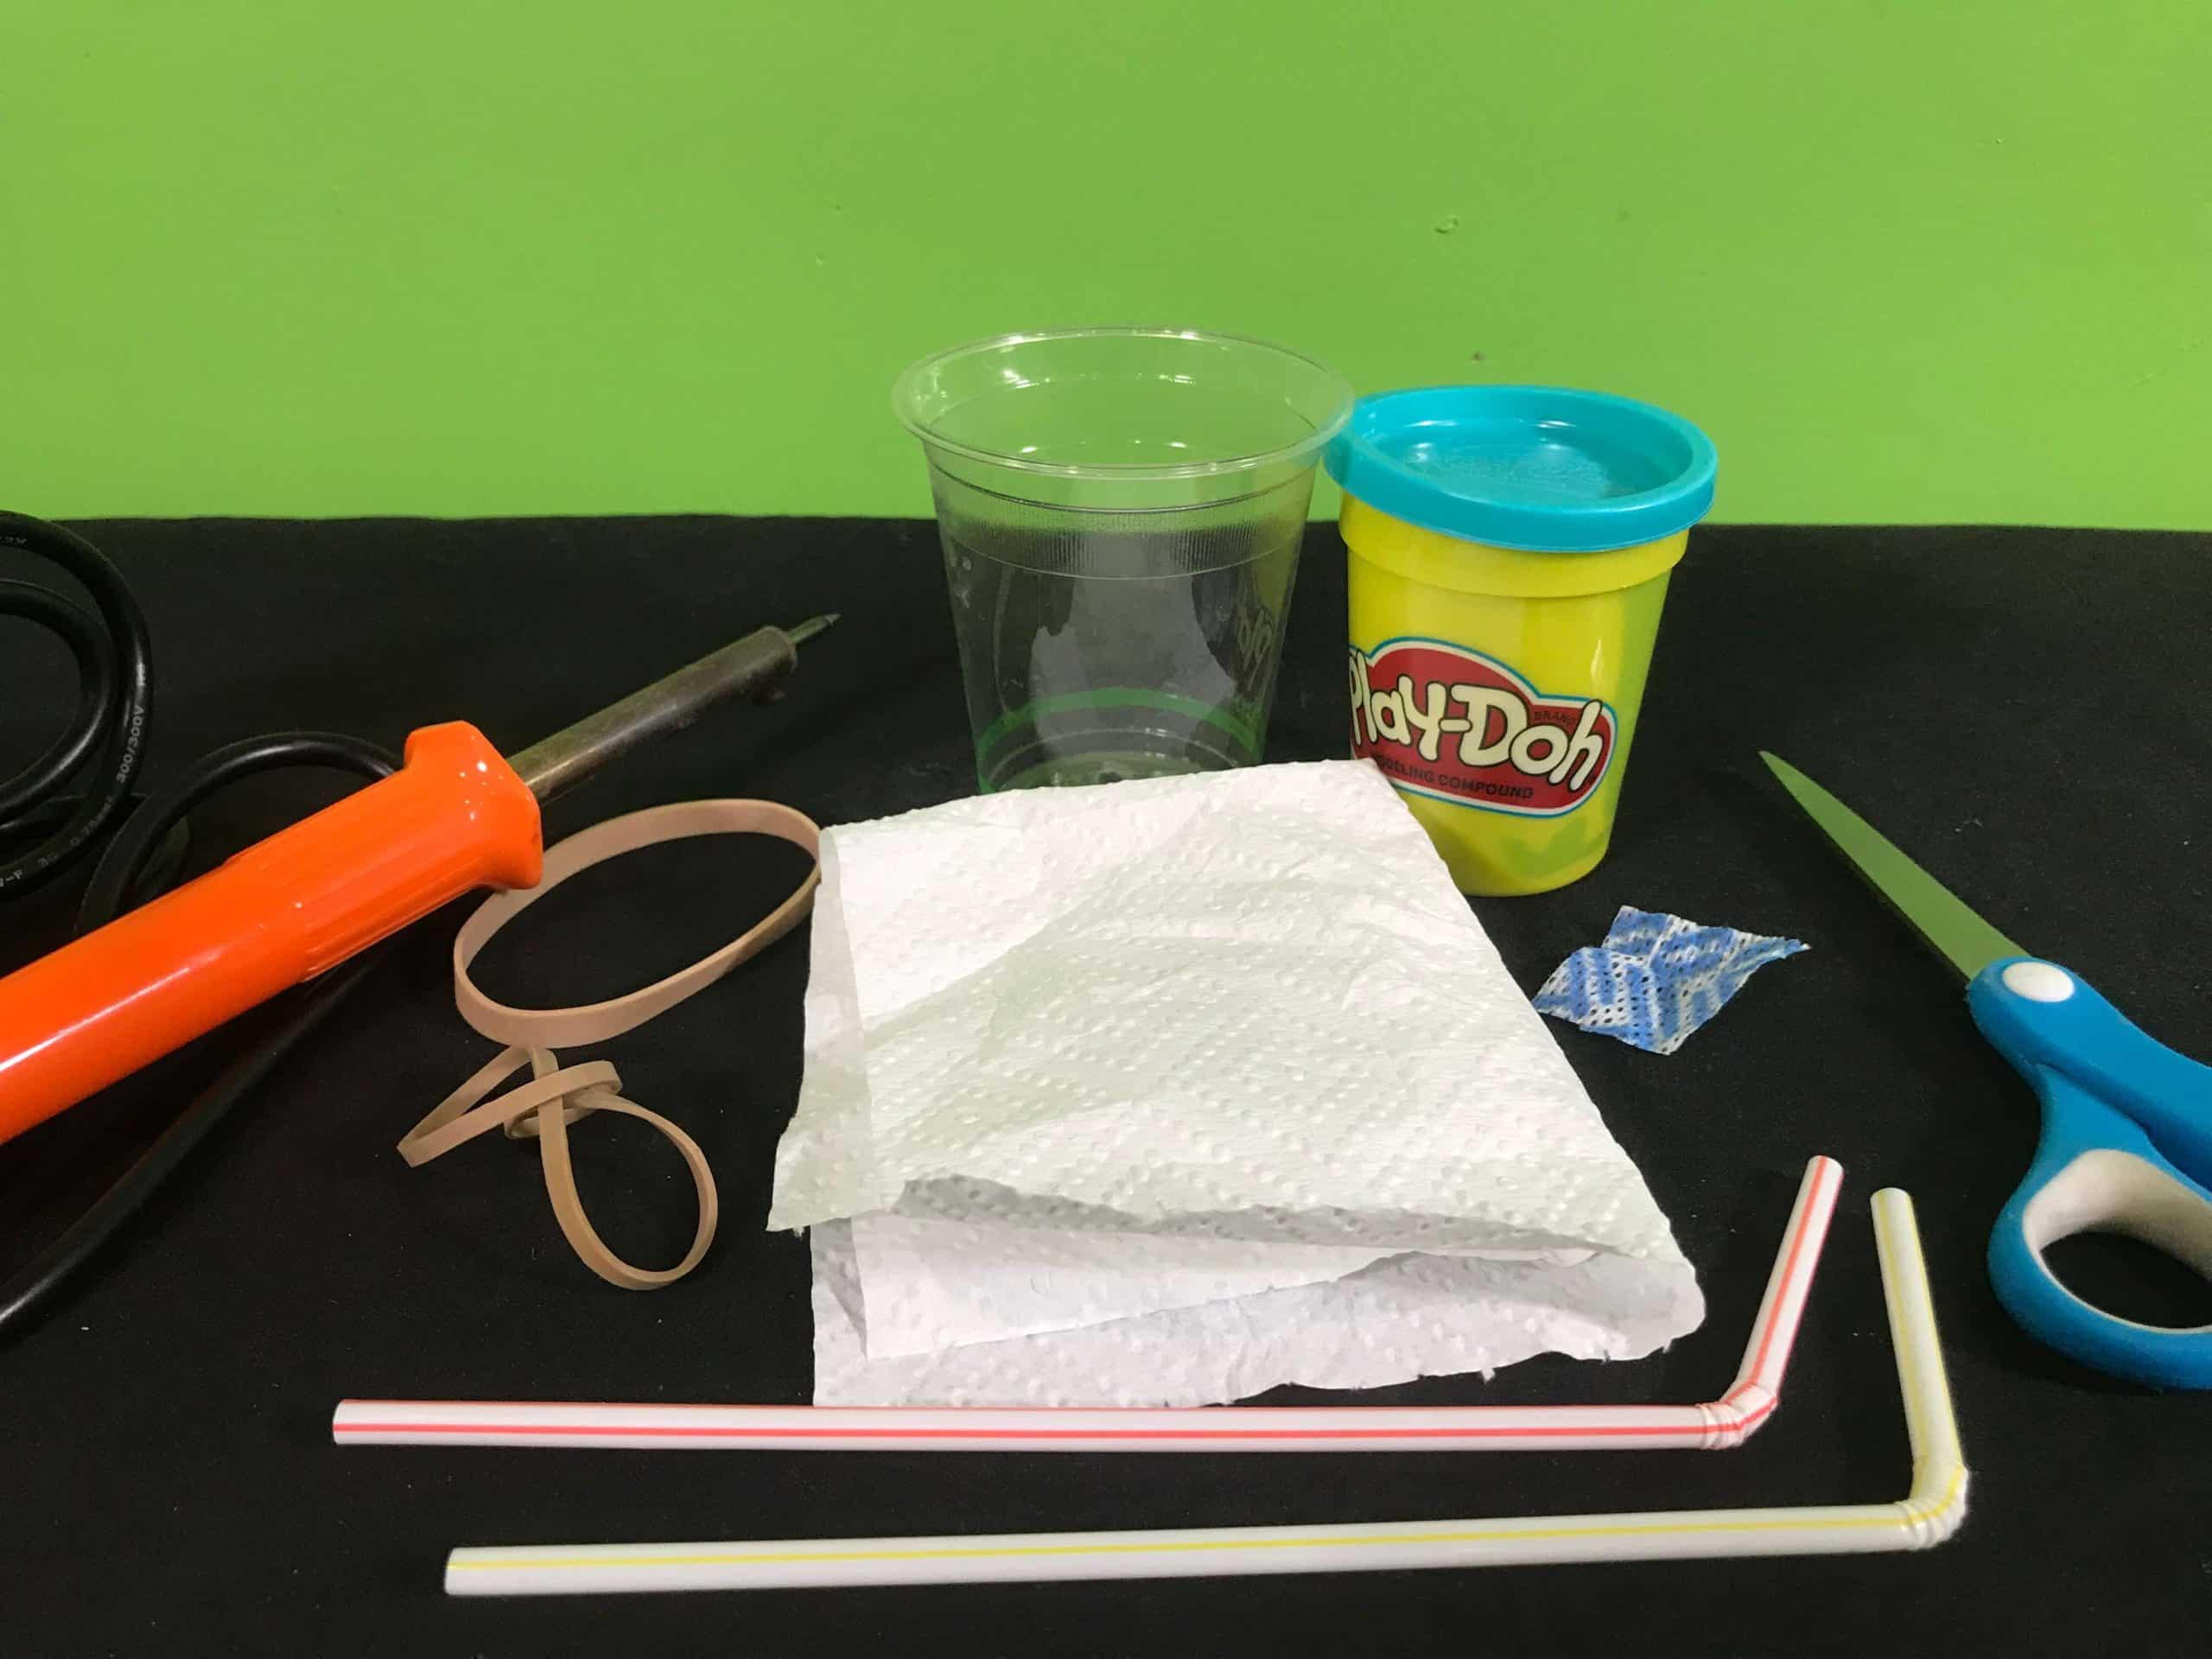 Make an insect pooter science experiment - materials needed